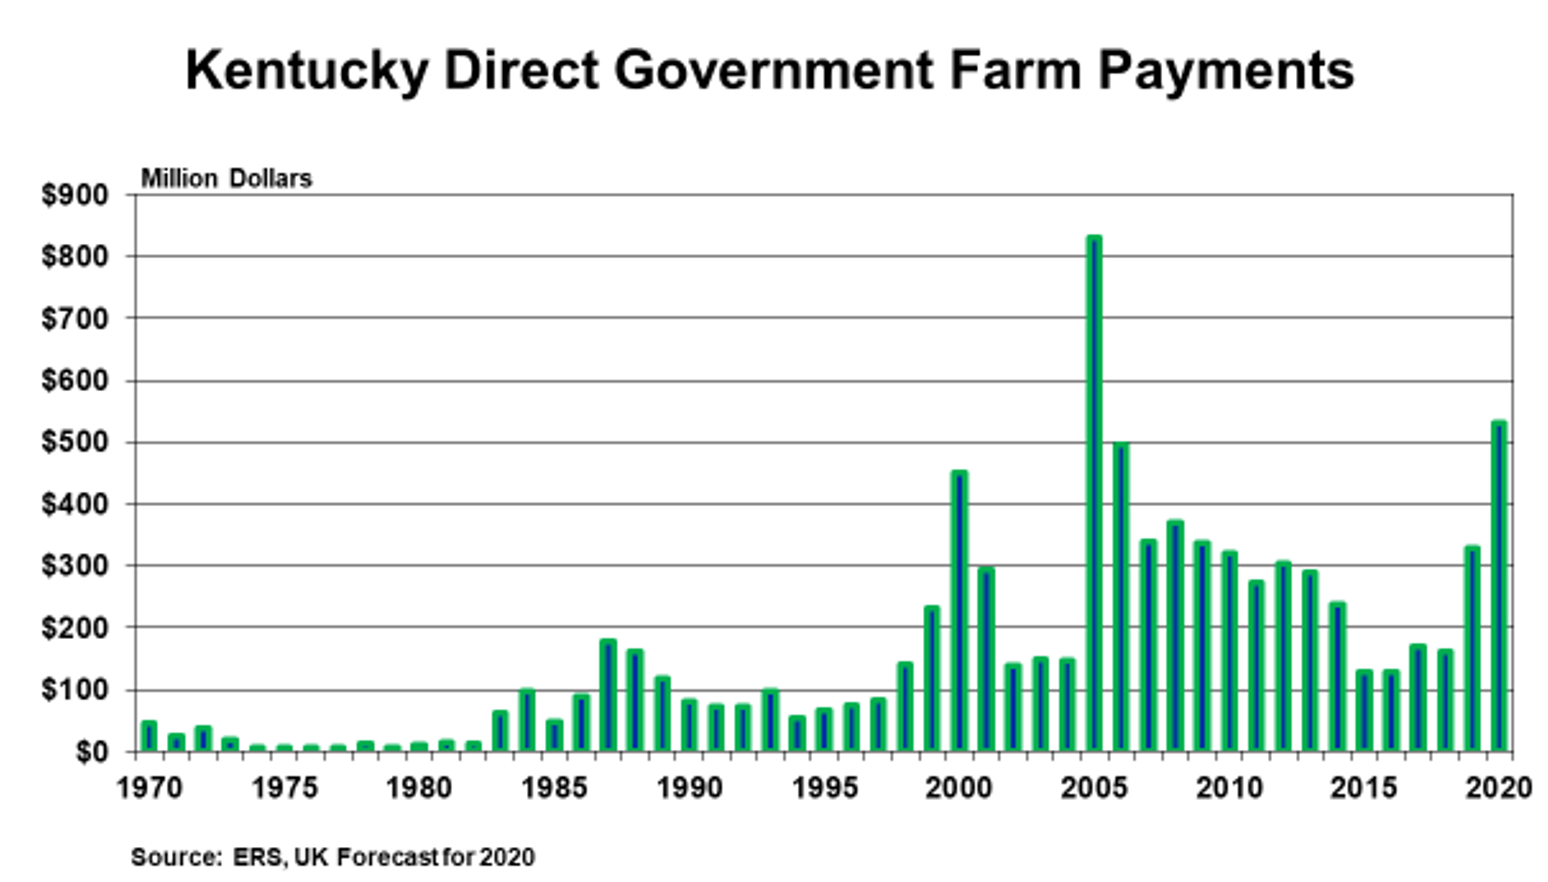 Graph of Kentucky Direct Government Farm Payments from 1970 to 2020